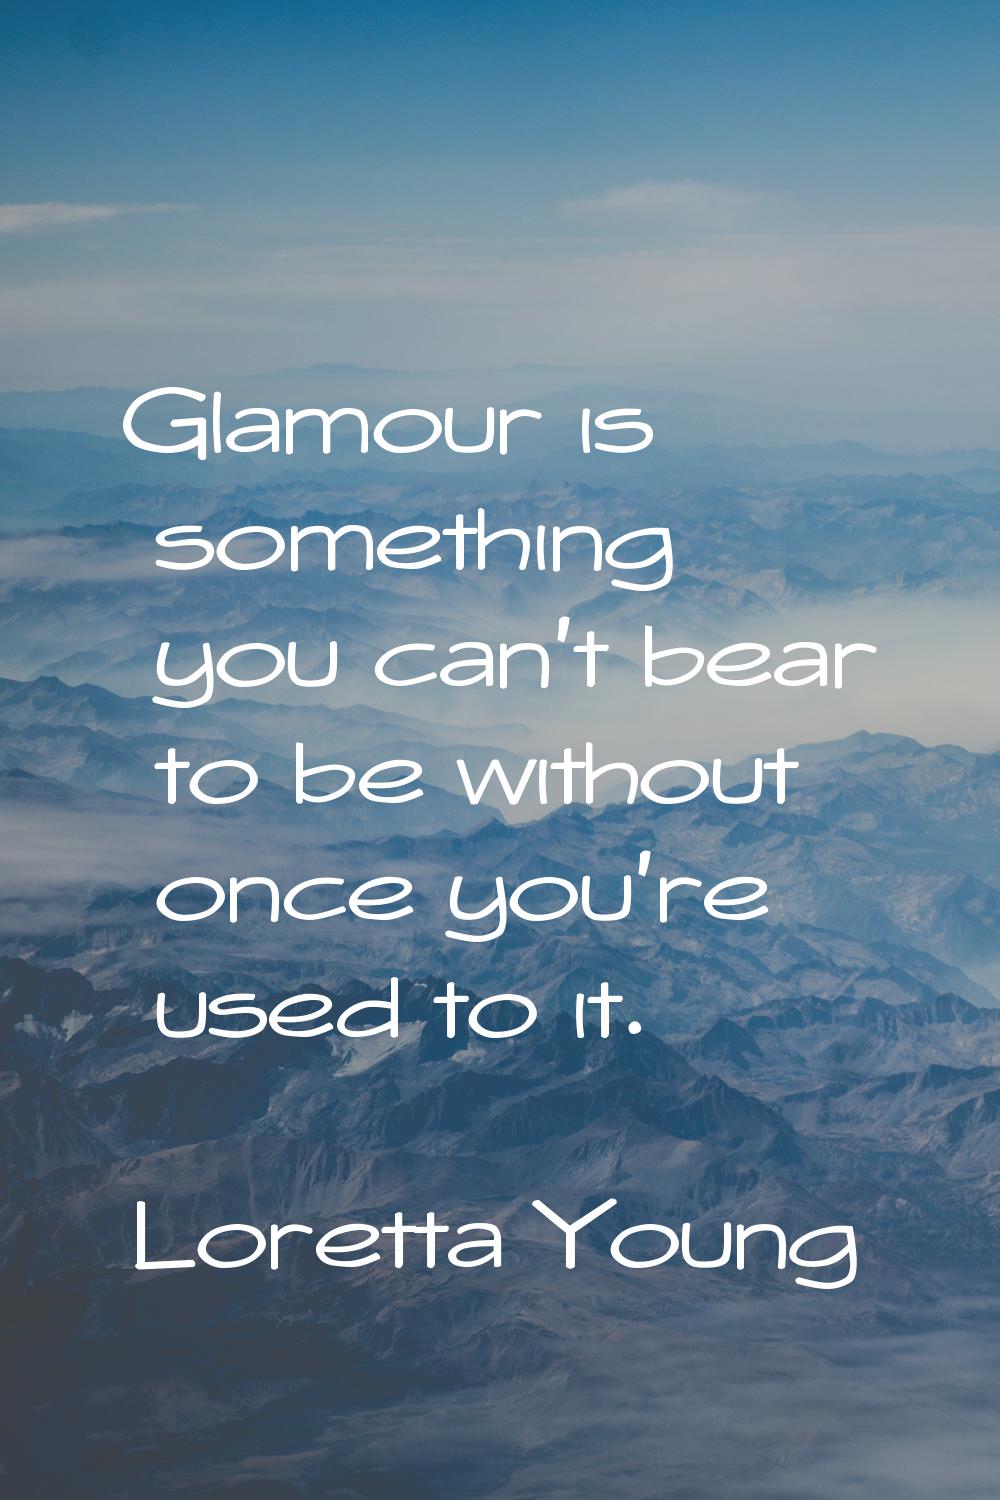 Glamour is something you can't bear to be without once you're used to it.